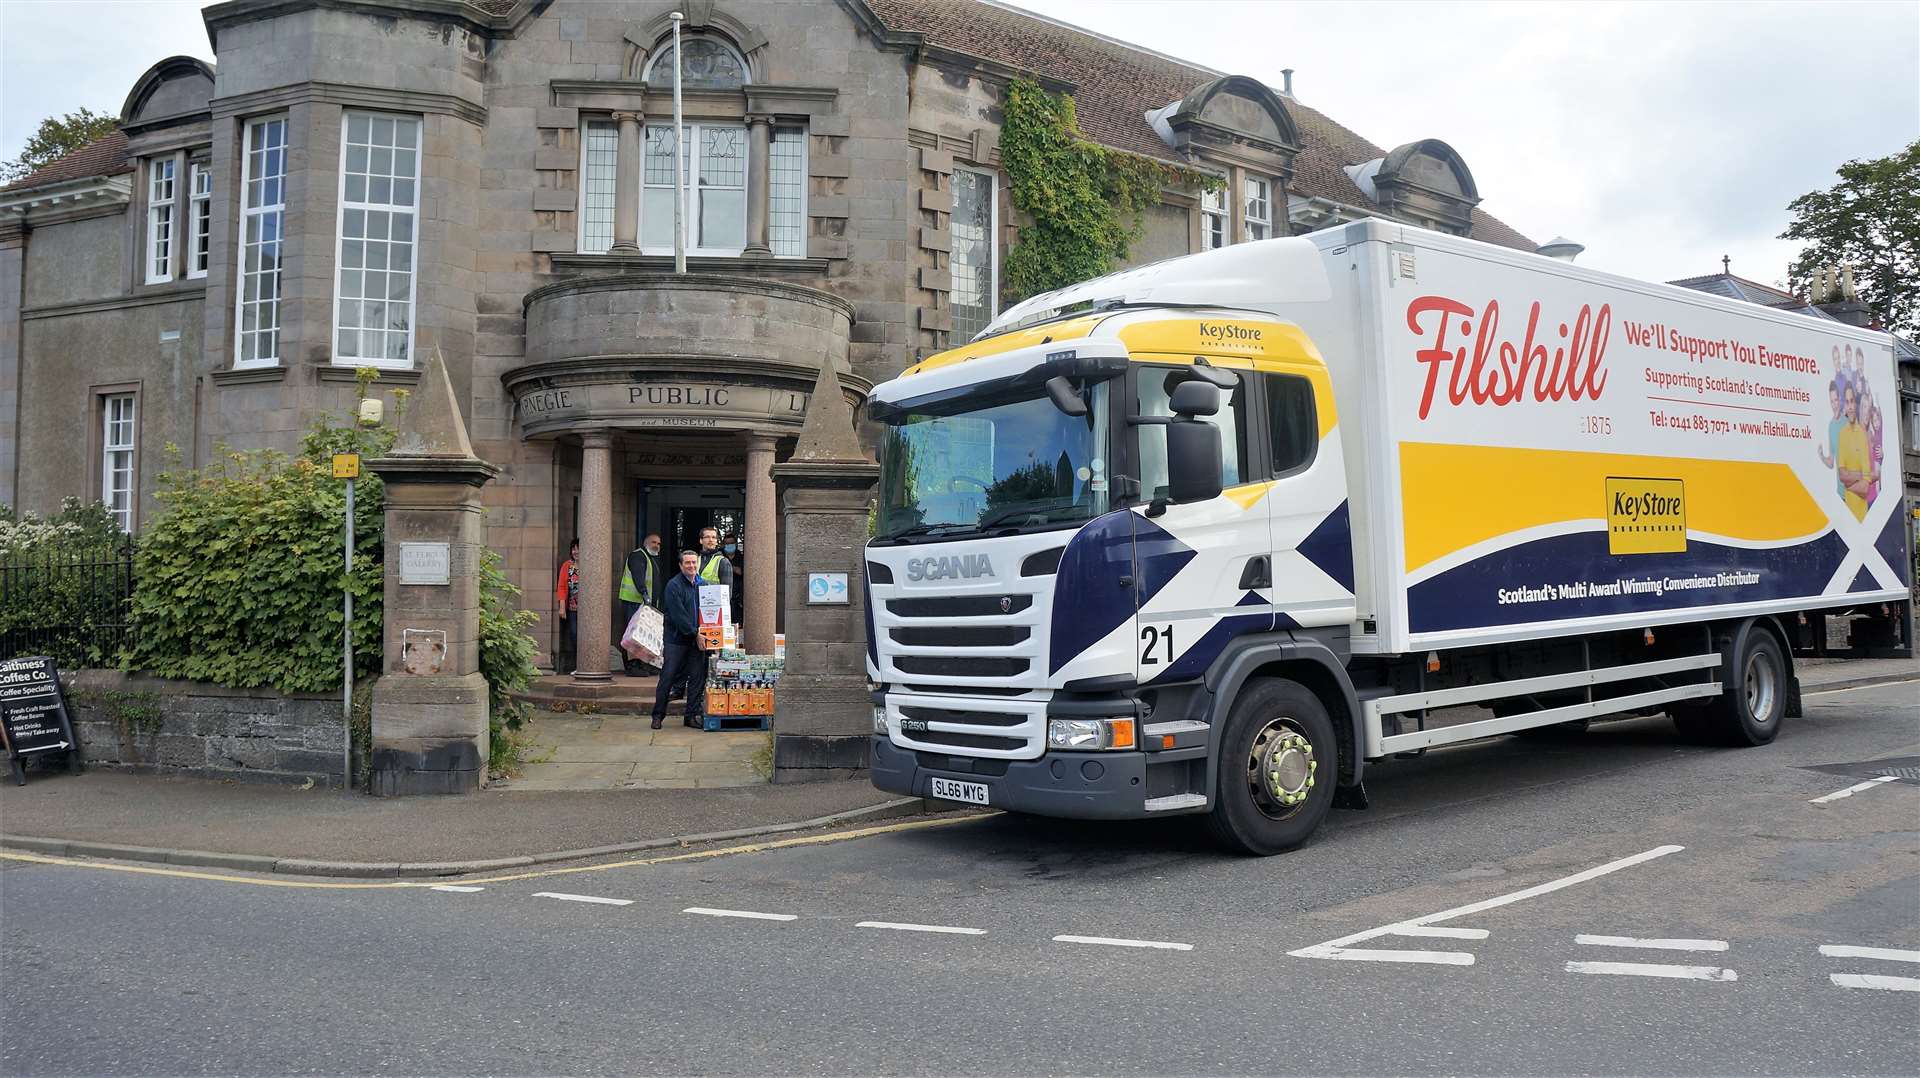 The pallet of food and essentials was delivered to the Sinclair Terrace based food bank via a KeyStore lorry.